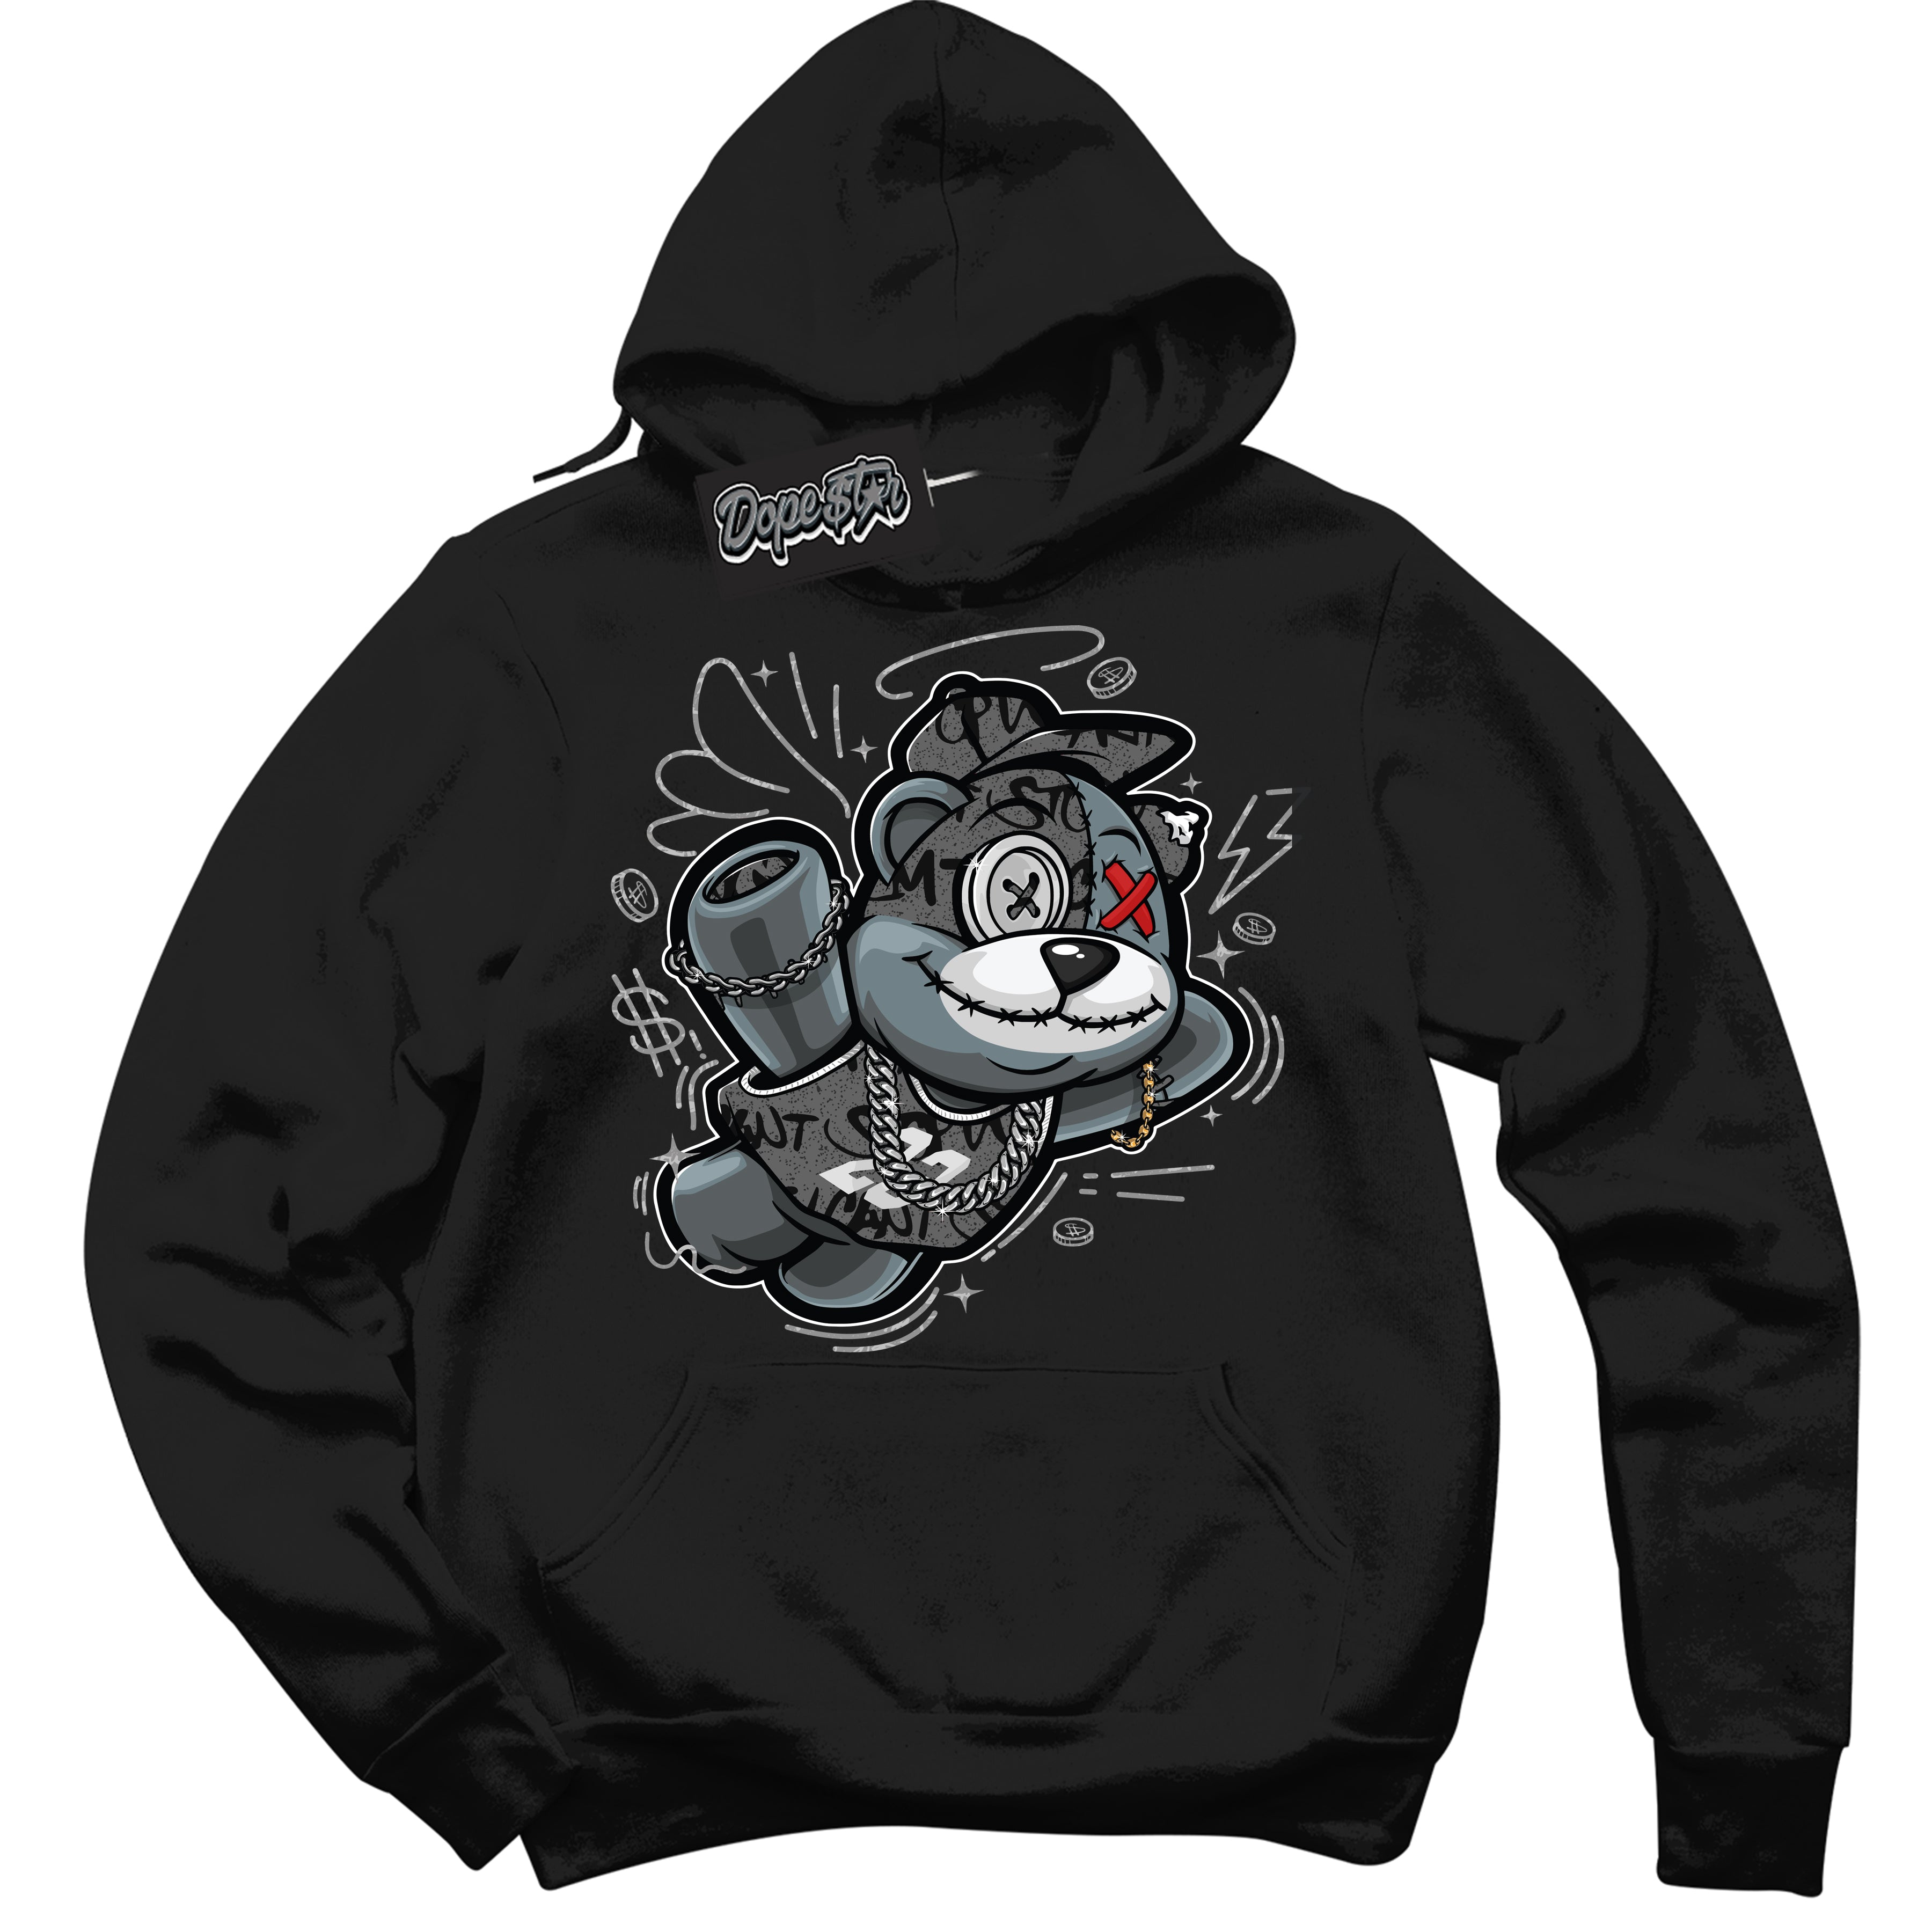 Cool Black Hoodie with “ Slam Dunk Bear ”  design that Perfectly Matches Rebellionaire 1s Sneakers.